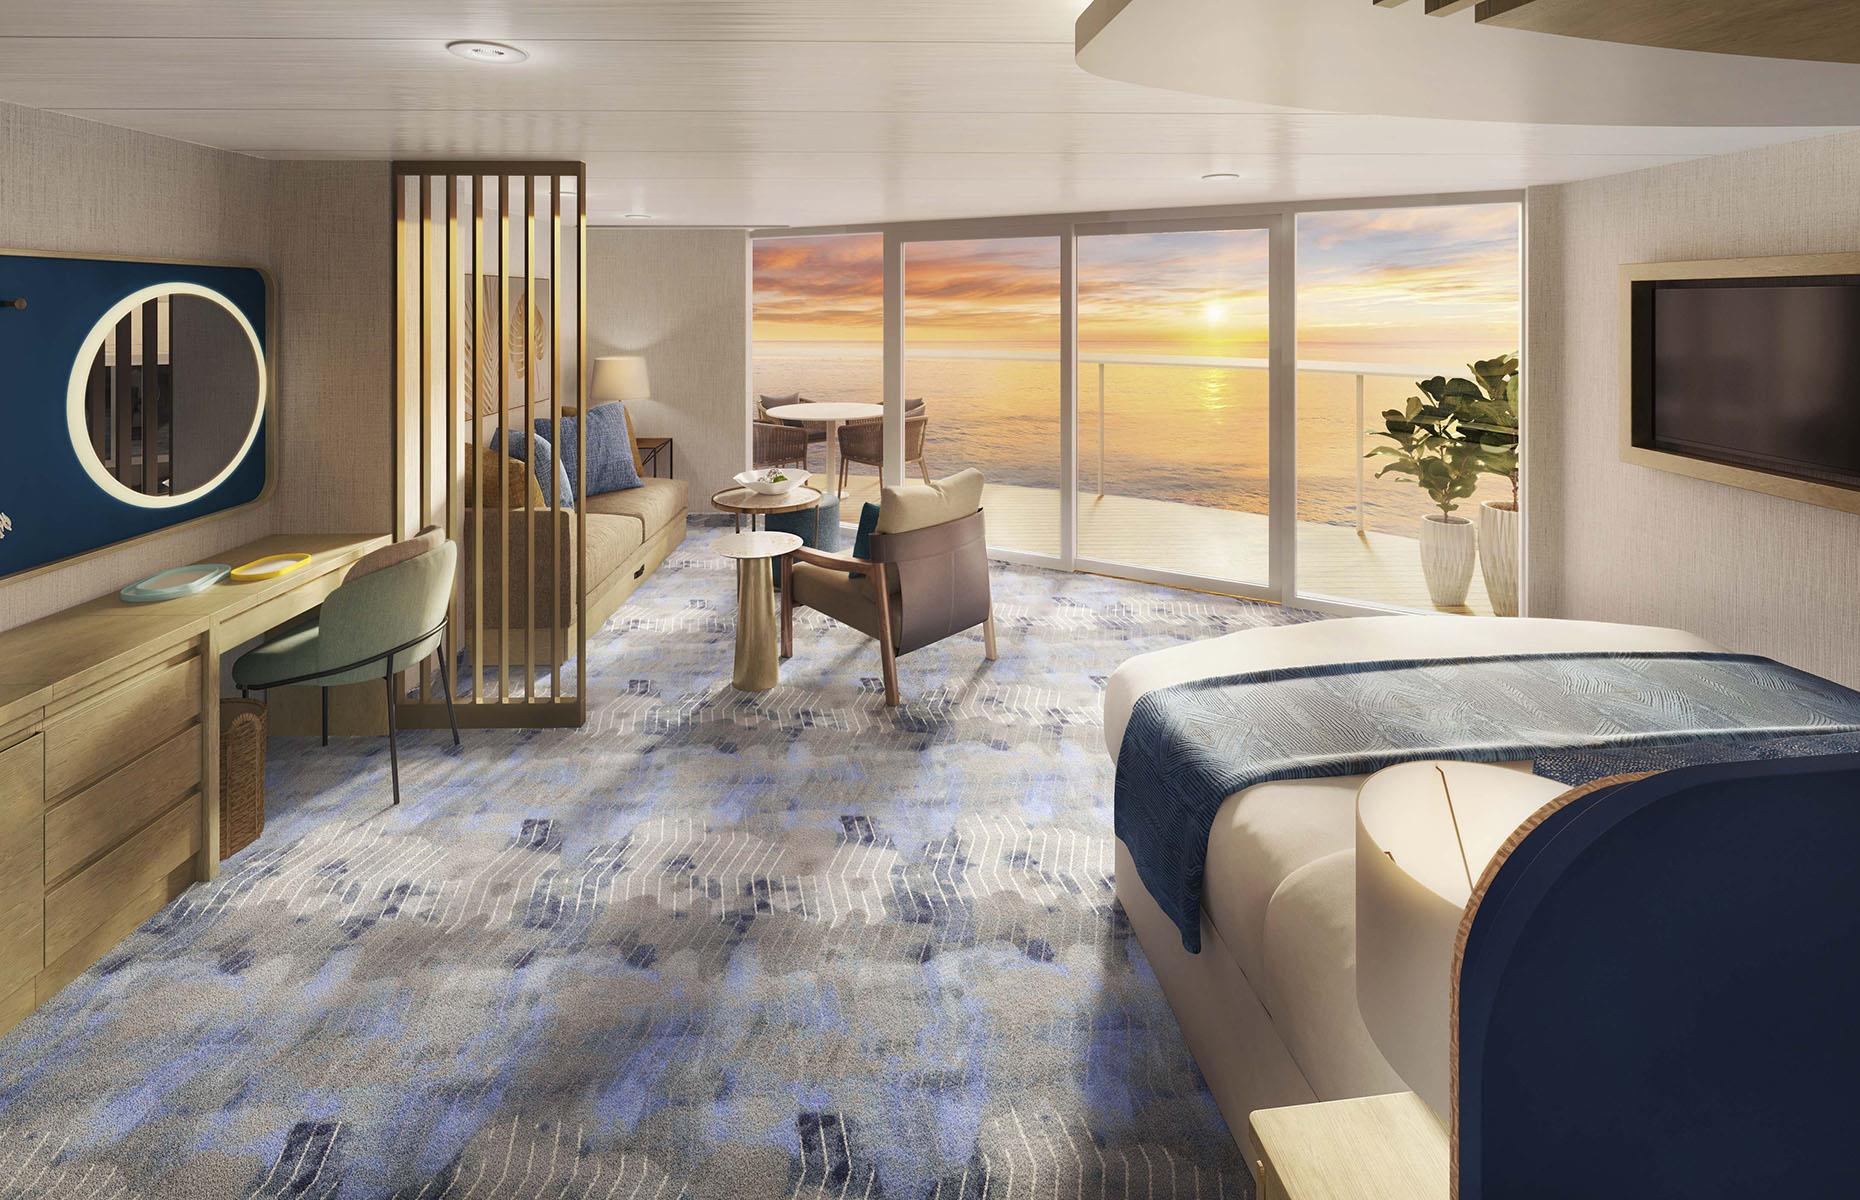 <p>While room prices have since increased for week-long voyages, you don't need to be super-rich to board this super-sized ship. <em>Icon</em> offers 28 different room types, giving guests options to suit all needs, whether they're looking for affordability, stunning sea views, or a family-oriented vacation experience.</p>  <p>According to <em>Forbes</em>, interior rooms now range between $1,851 and $3,300, while exterior rooms span from $2,061 to $4,119. Balcony rooms, which offer a more premium guest experience, start at $2,249 and can reach up to $5,245.</p>  <p>Meanwhile, luxury Sunset Suites (pictured) cost a staggering $10,864 per week per person for those looking to splurge. Costs vary depending on the time of the year, with March to September the peak time to travel. </p>